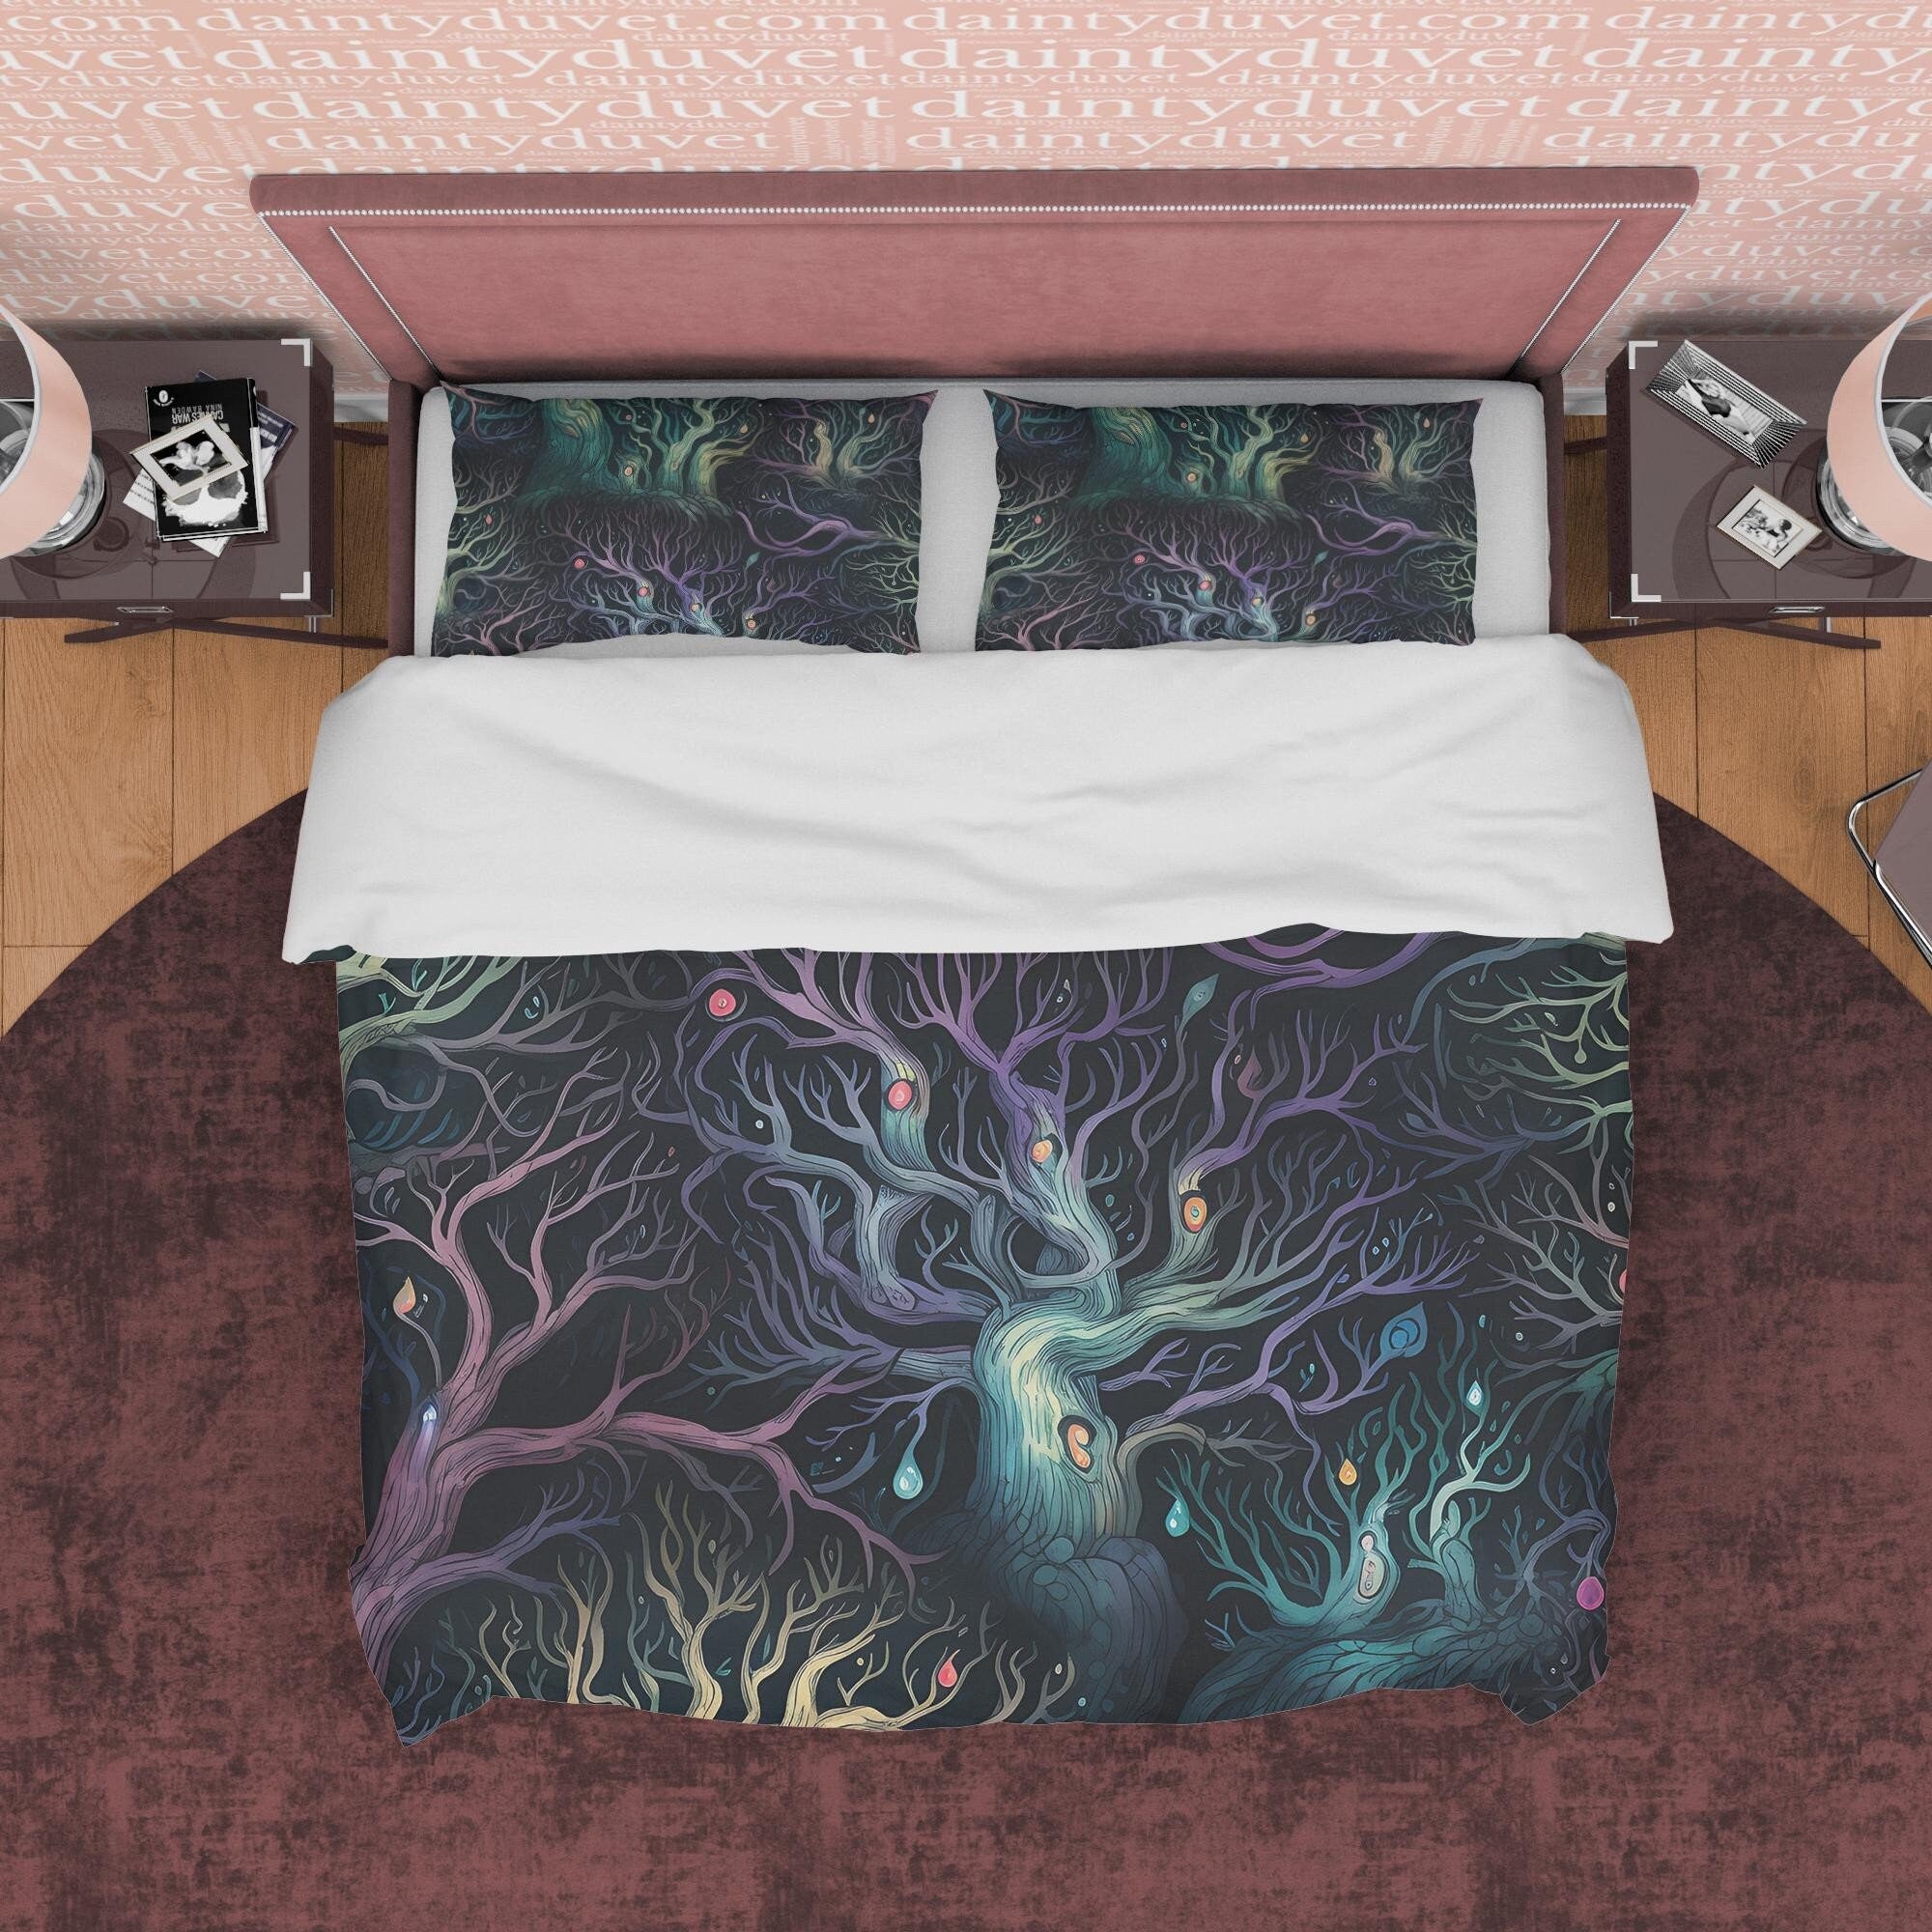 Enchanted Forest, Green and Purple Shades, Halloween Duvet Cover Set, Aesthetic Bedding, Spooky Room Decor, US, European, Australian Sizes